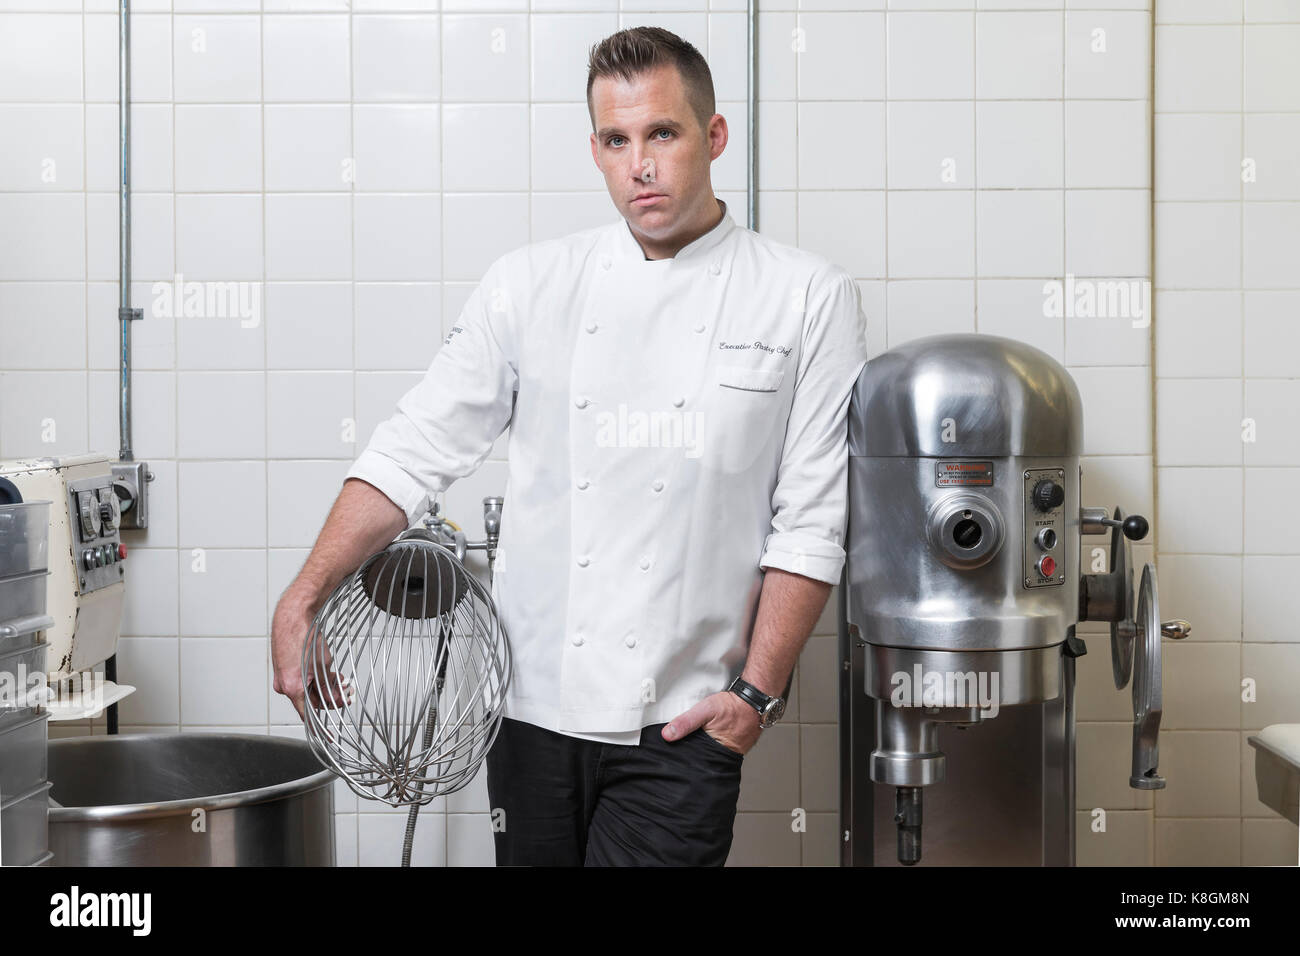 Portrait of pastry chef holding industrial whisk in kitchen Stock Photo